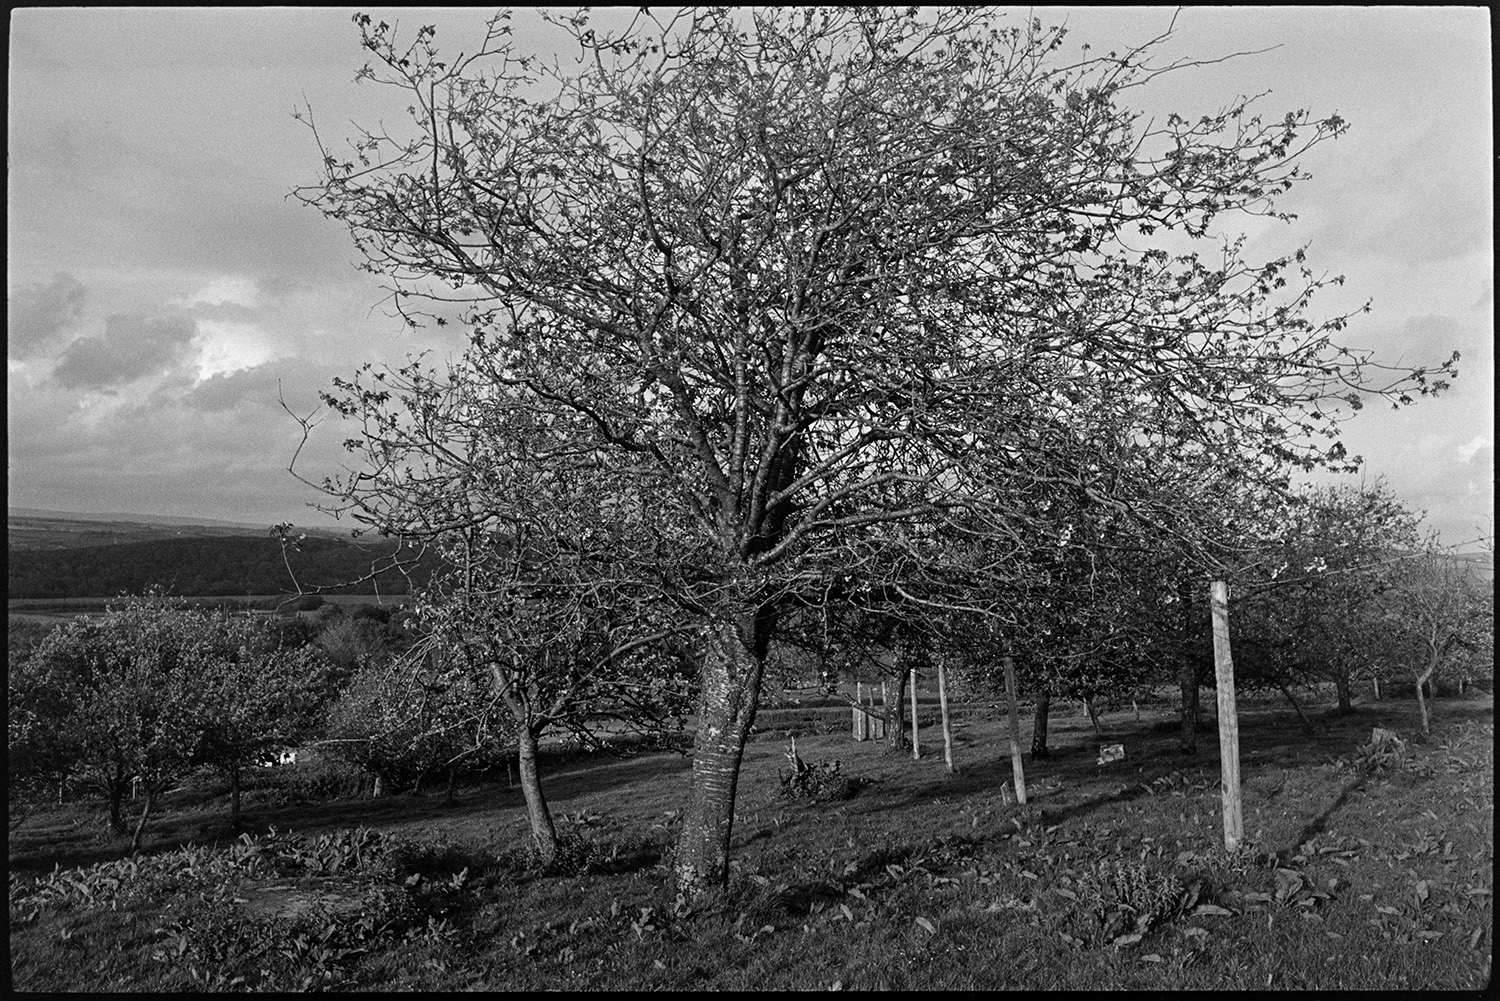 Orchards, Mazzard cherry trees.
[Mazzard cherry trees in an old orchard near Atherington with a wooded landscape in the background.]